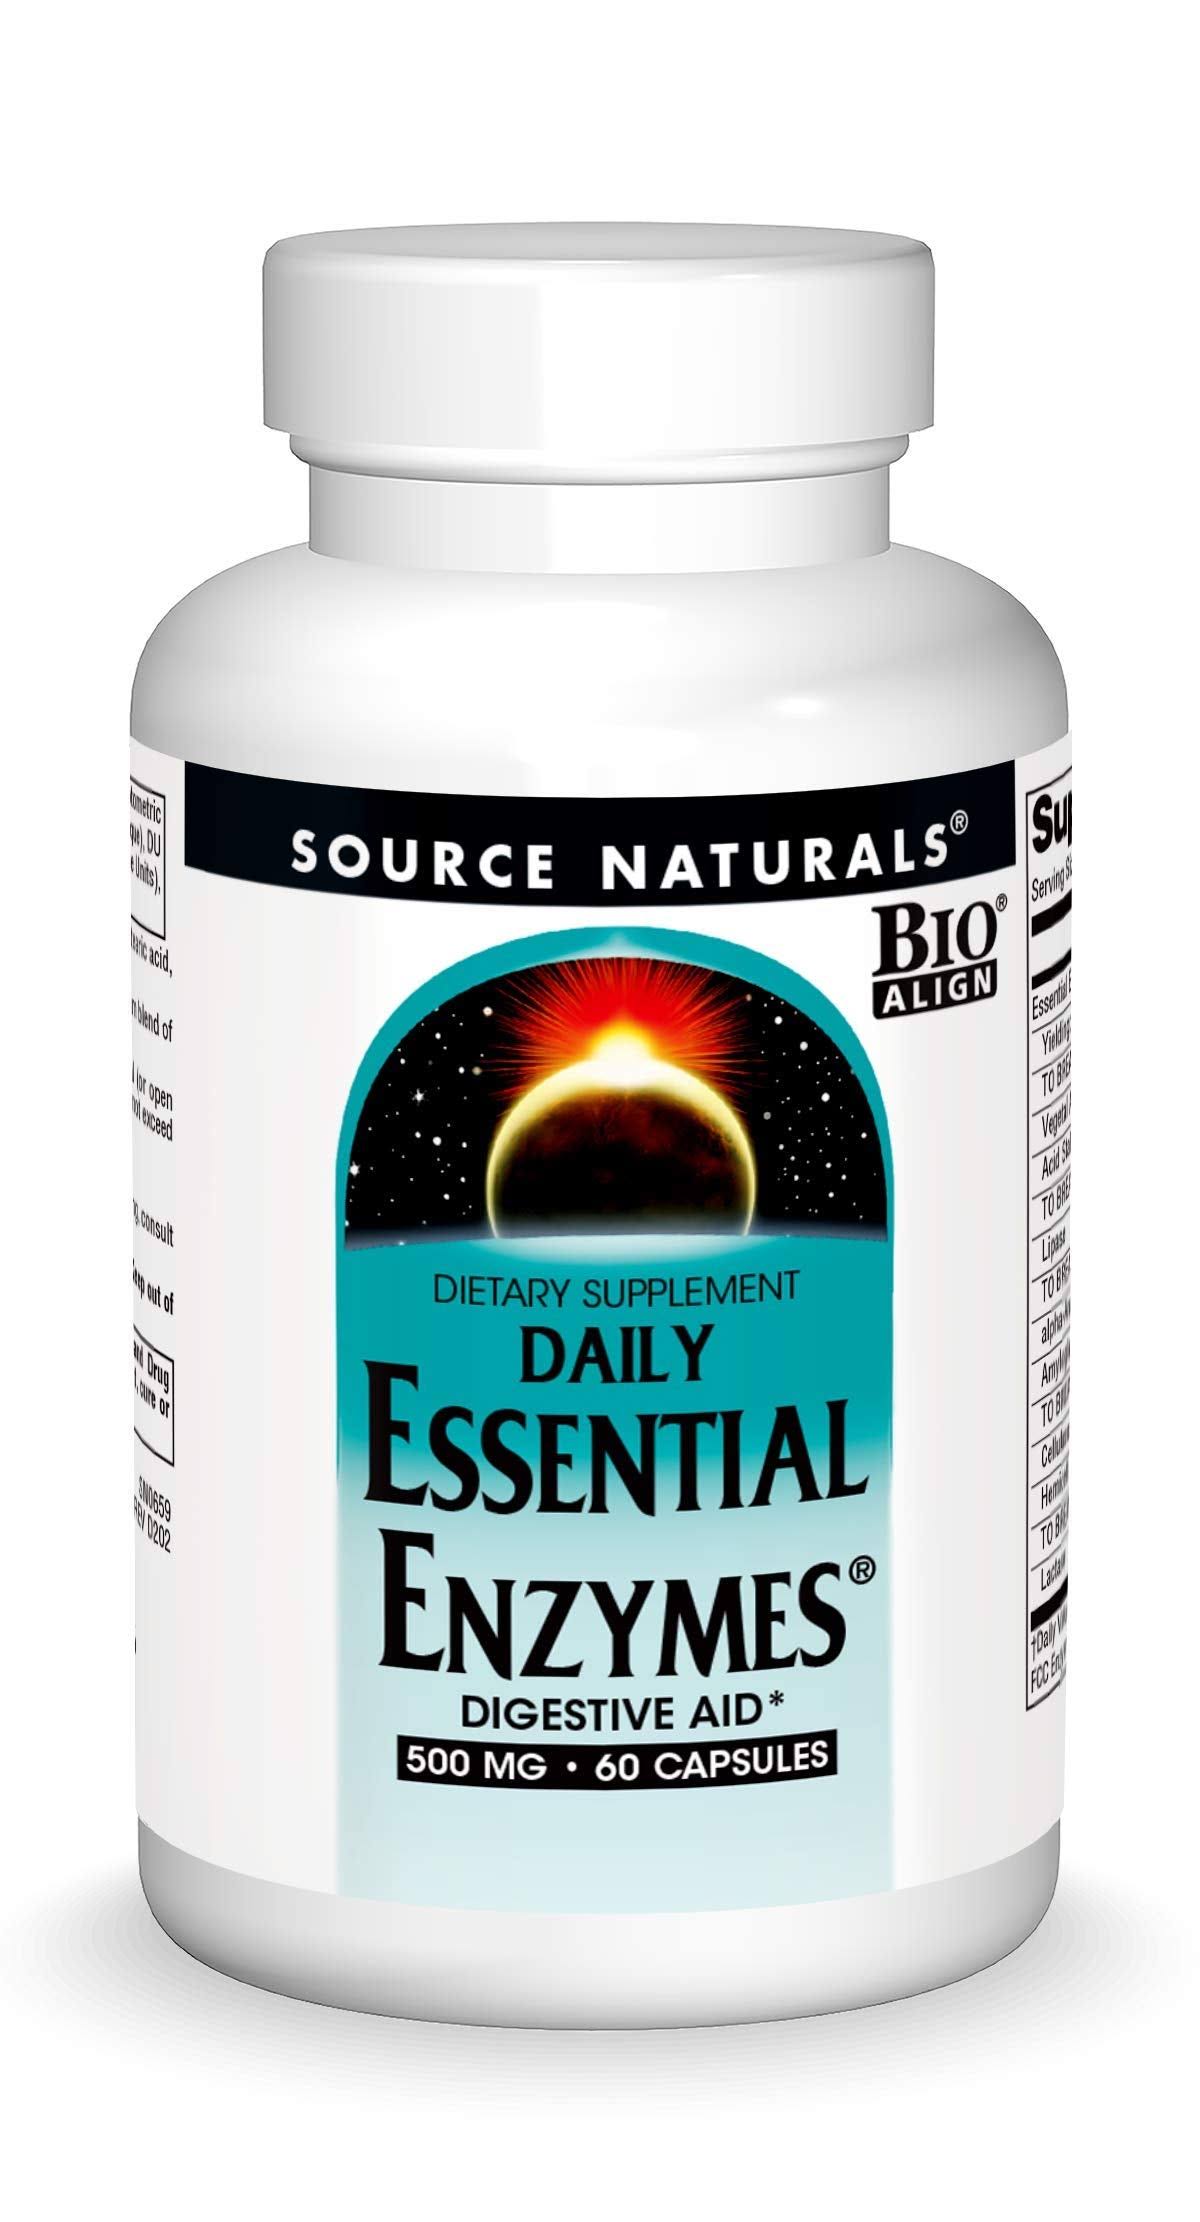 Source Naturals Daily Essential Enzymes Digestive Aid Capsules - 500mg, 60ct